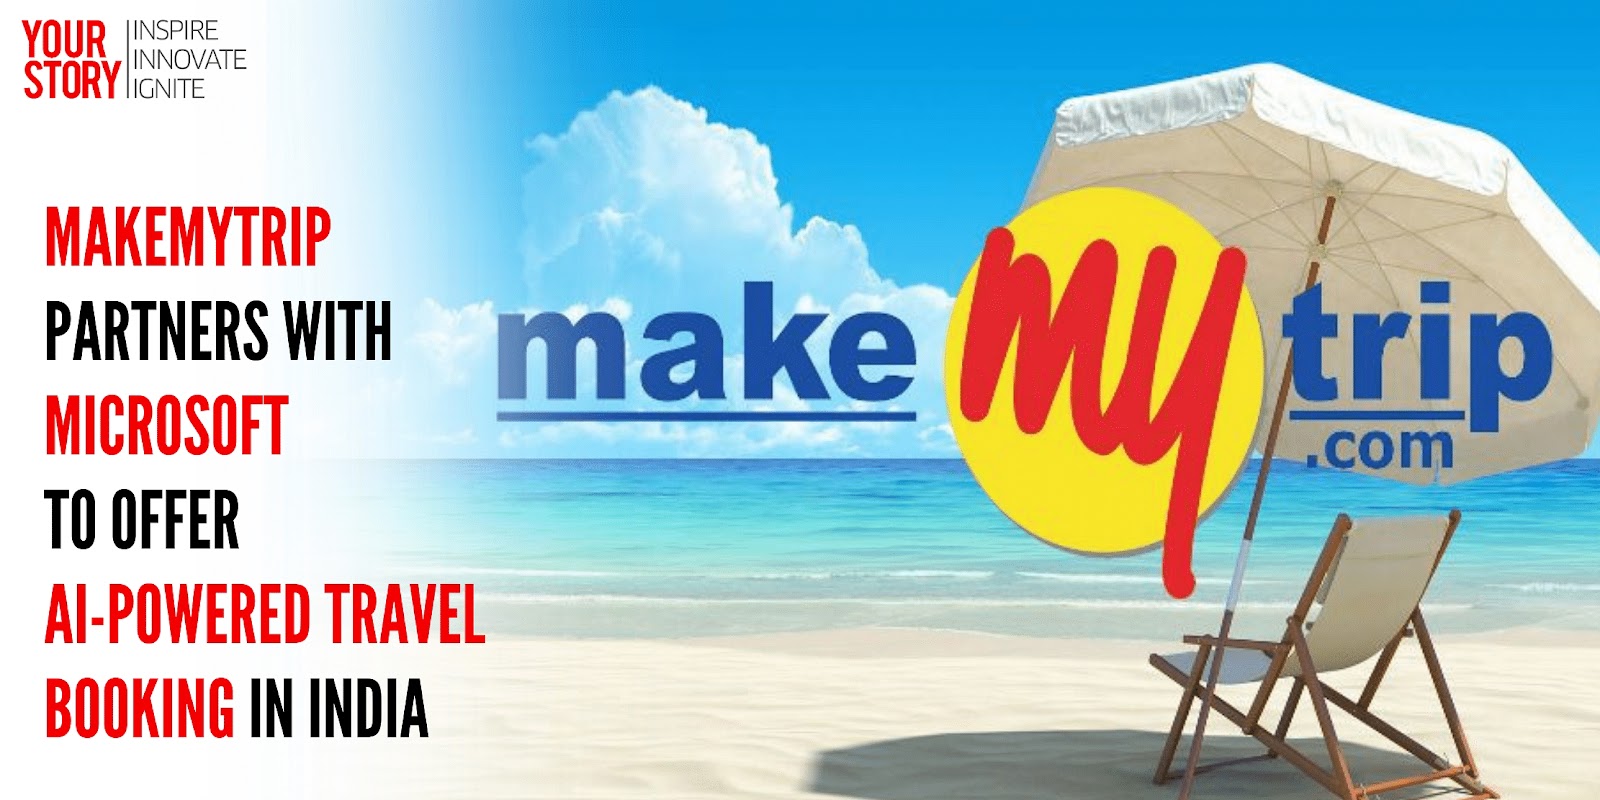 BoycottMakeMyTrip app trending in India as Indians are angry with